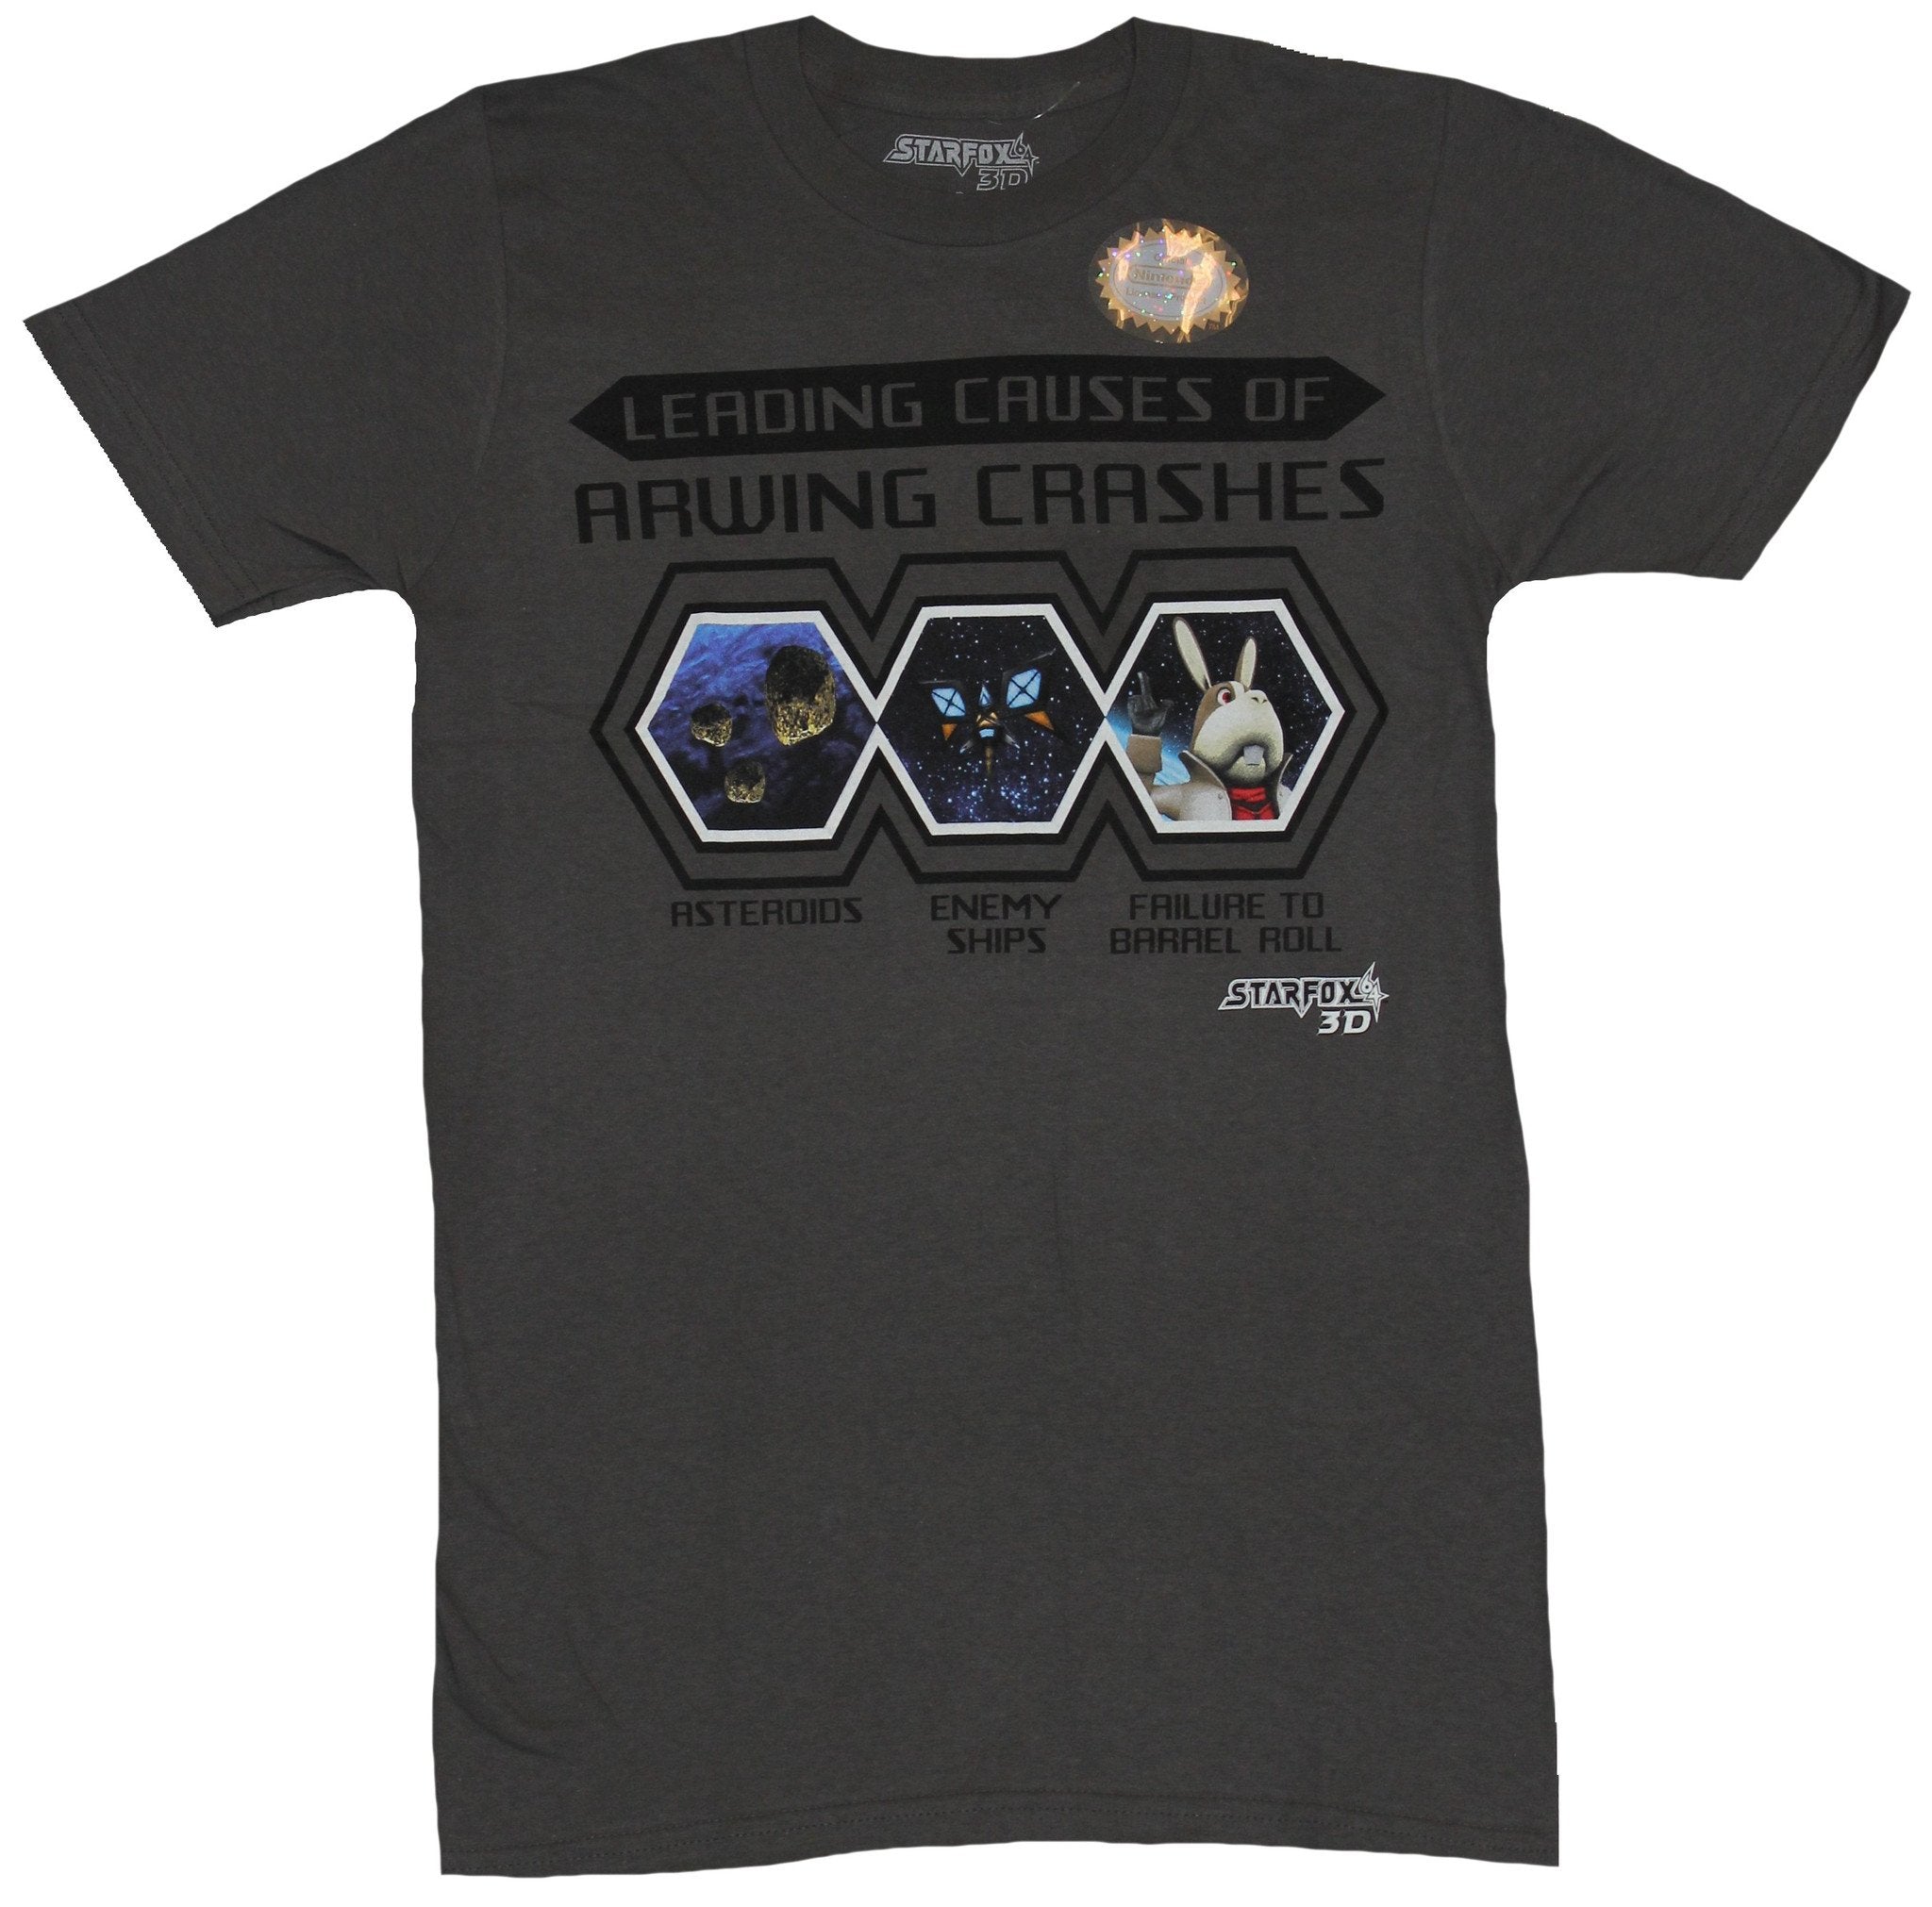 Starfox 3Ds Mens T-Shirt - Leading Causes of Aawing Crashes 3 Box Image